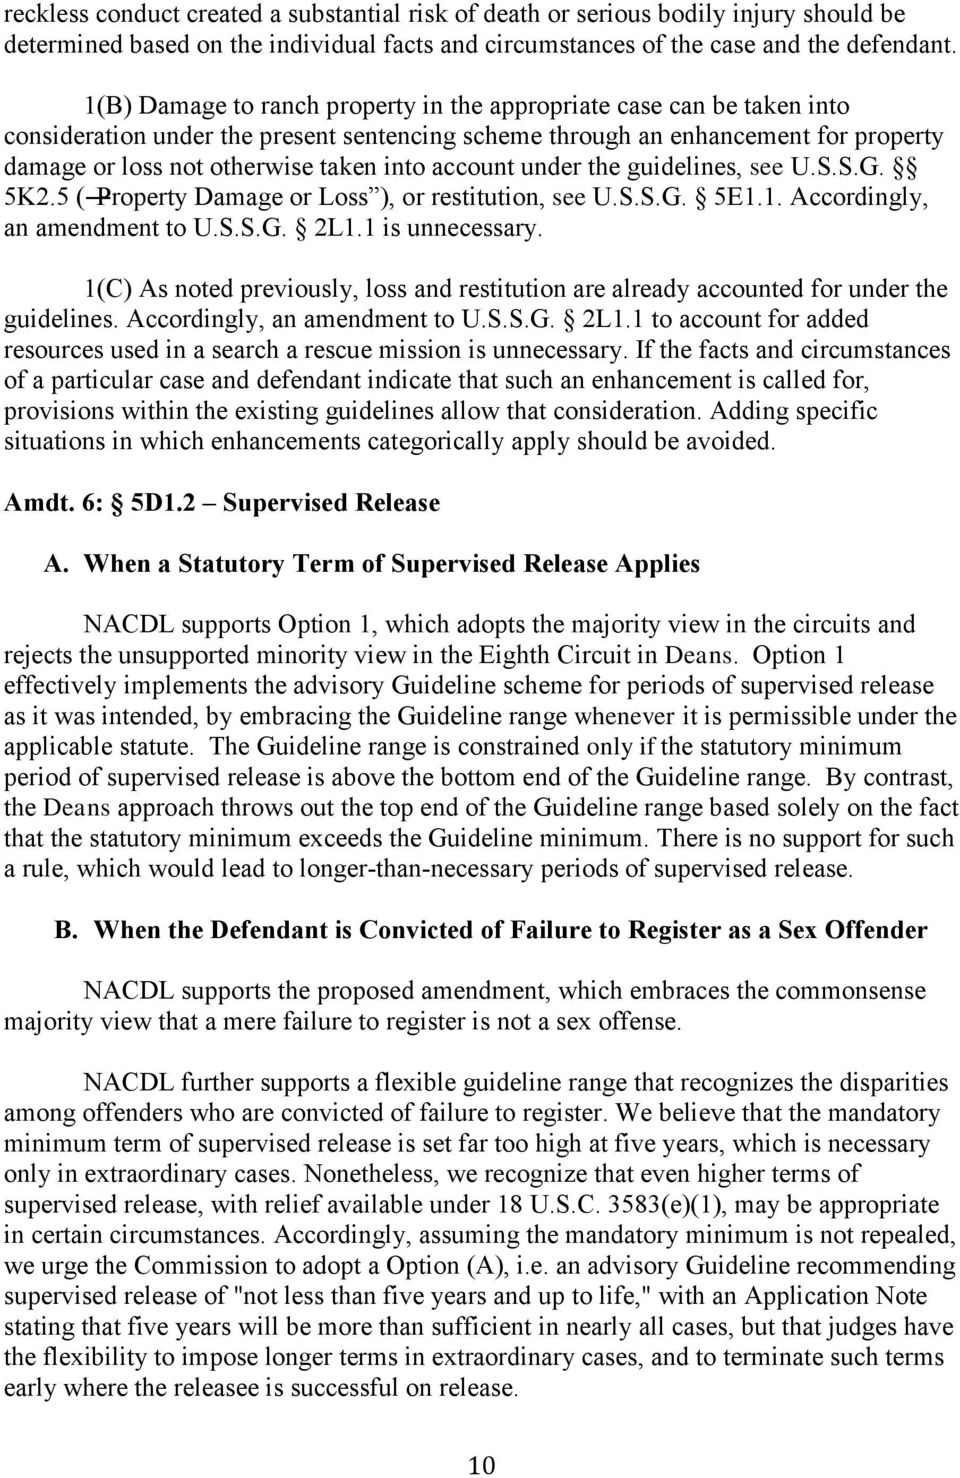 account under the guidelines, see U.S.S.G. 5K2.5 ( Property Damage or Loss ), or restitution, see U.S.S.G. 5E1.1. Accordingly, an amendment to U.S.S.G. 2L1.1 is unnecessary.